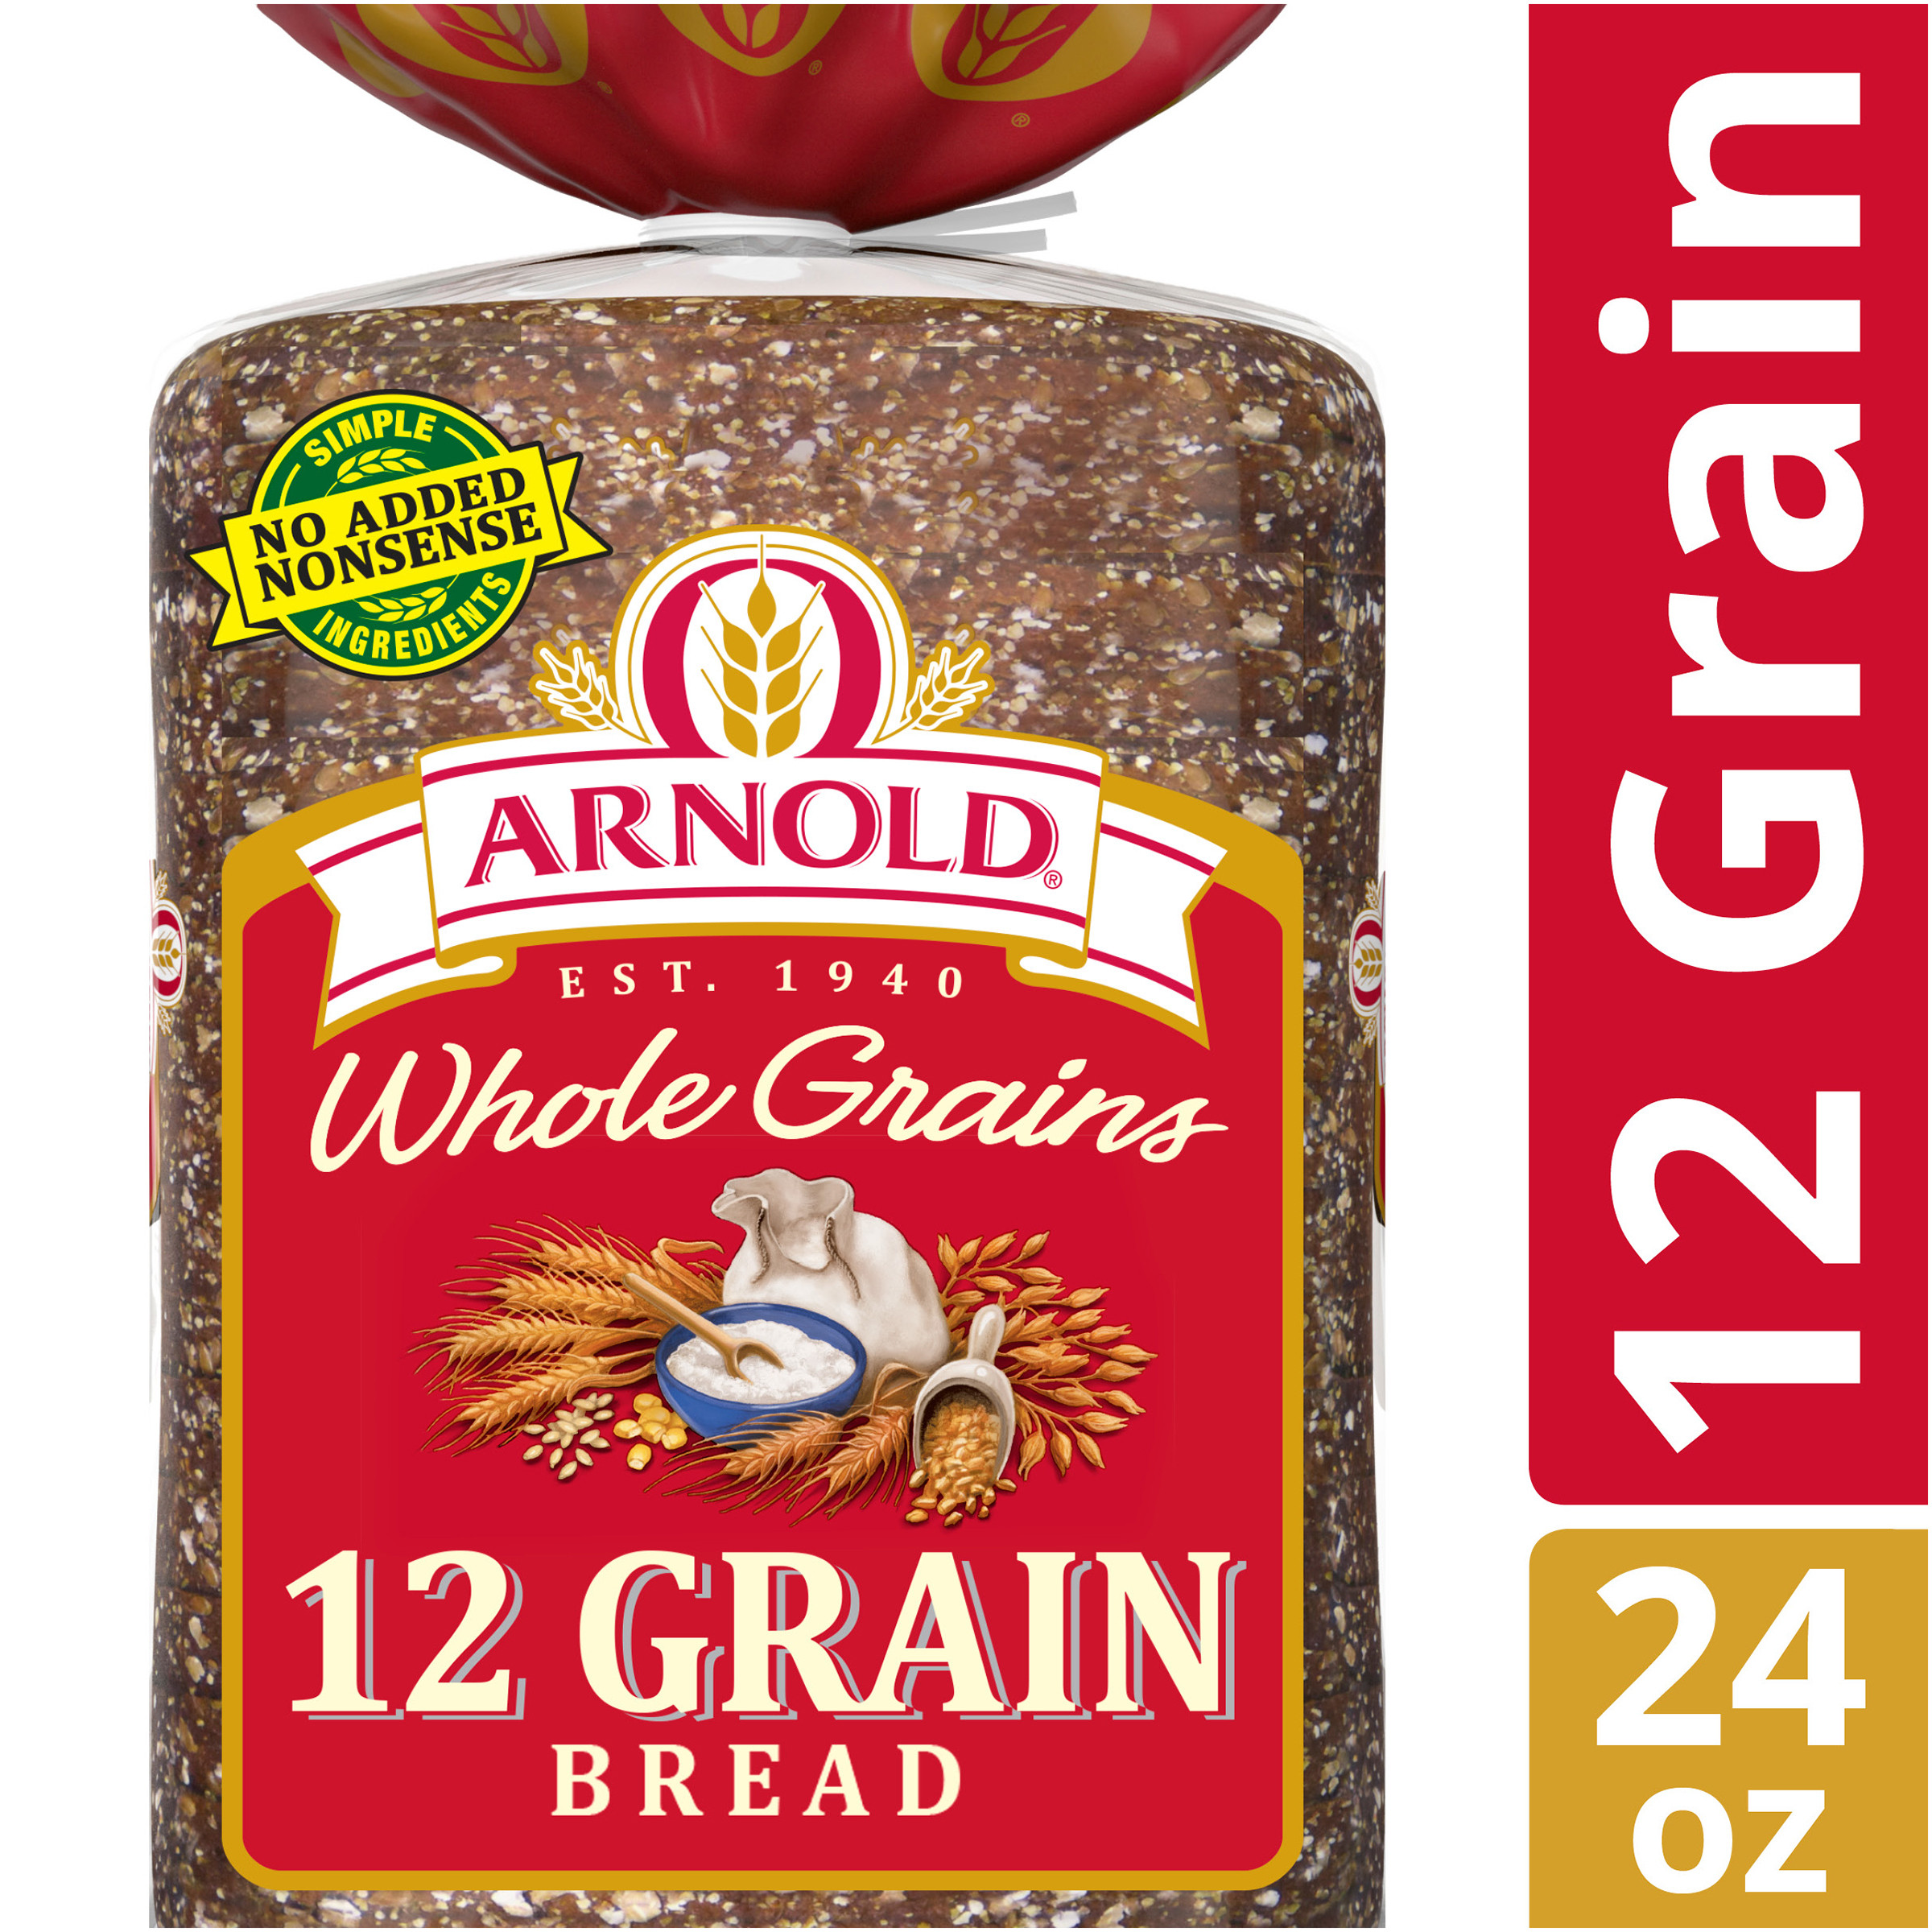 Arnold Whole Grain Bread
 Arnold Whole Grains 12 Grain Bread Baked with Simple